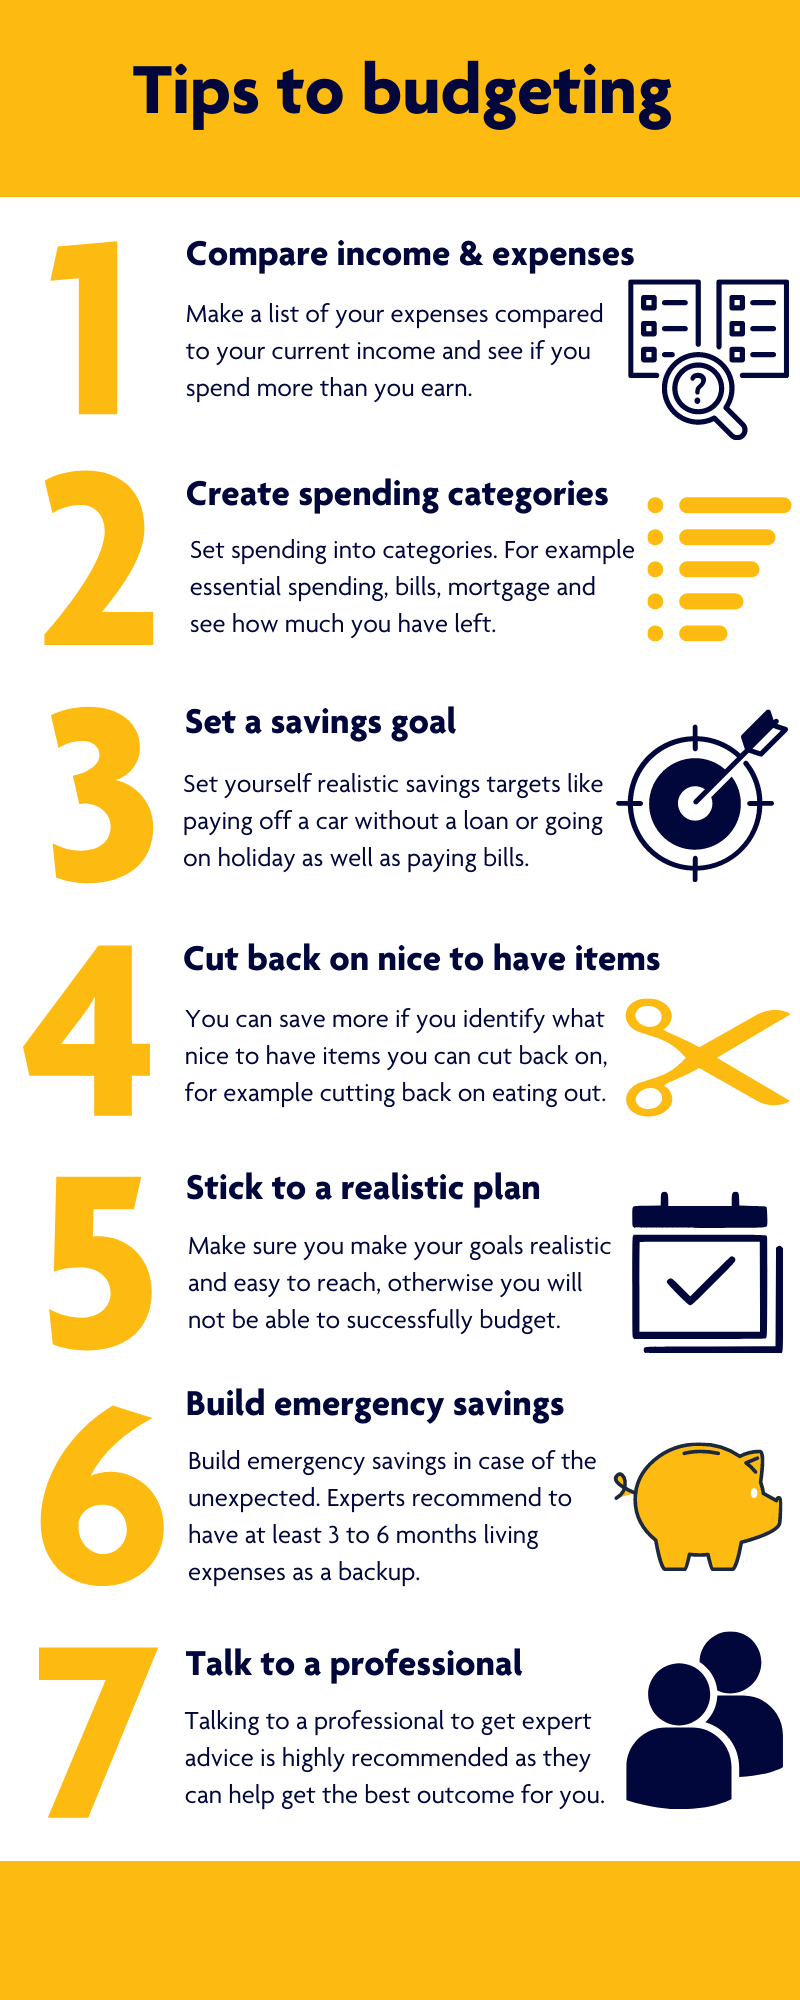 Tips to budgeting - Non-Branded.png